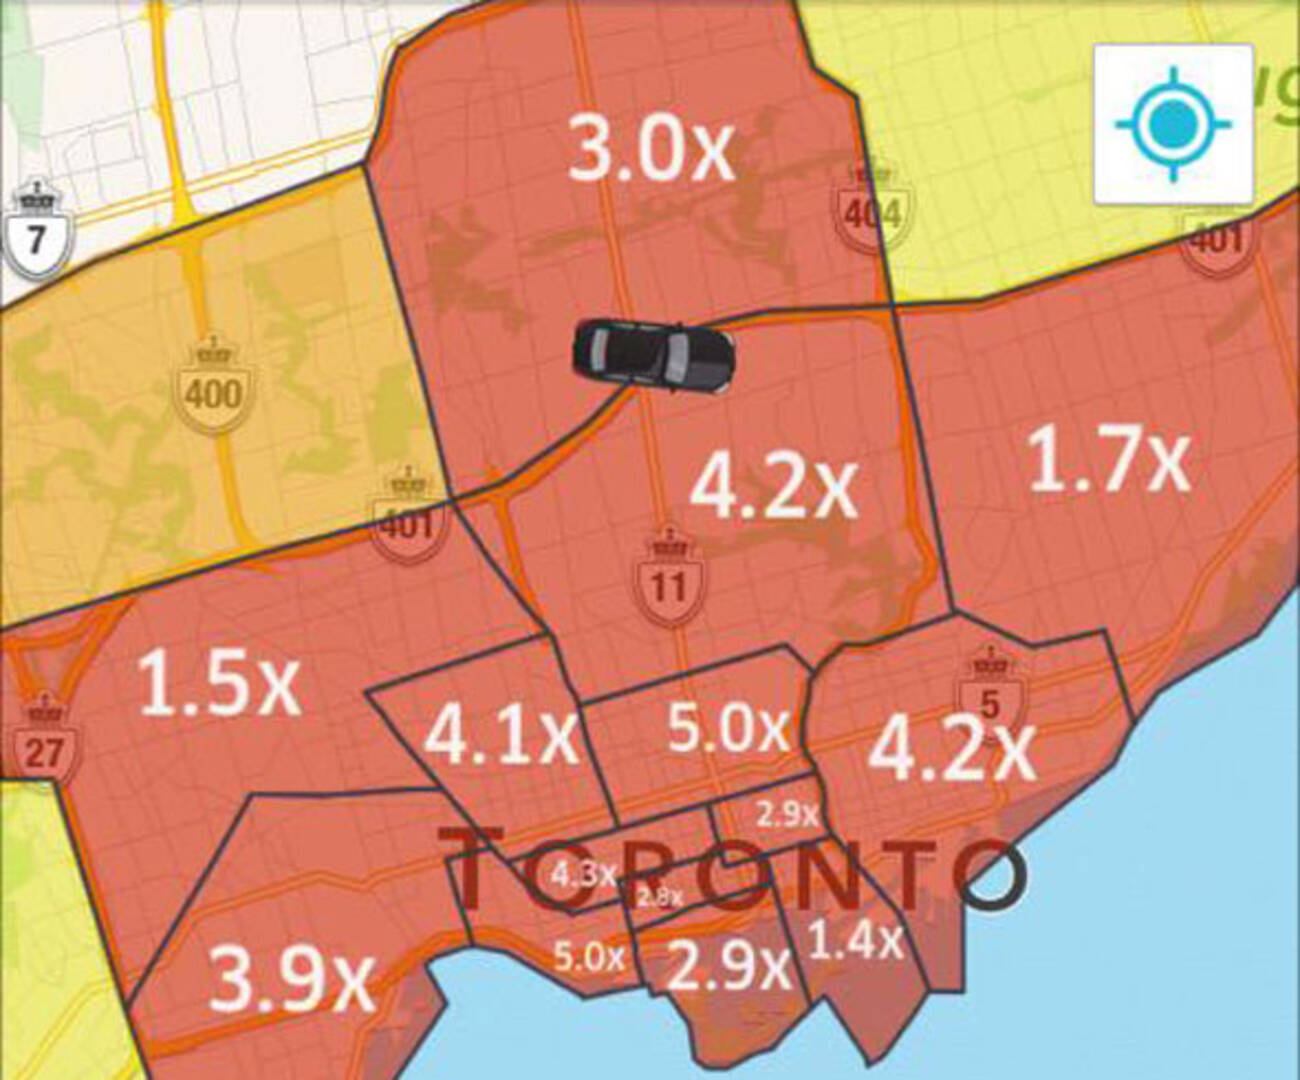 Uber takes heat for jacking prices during TTC outage